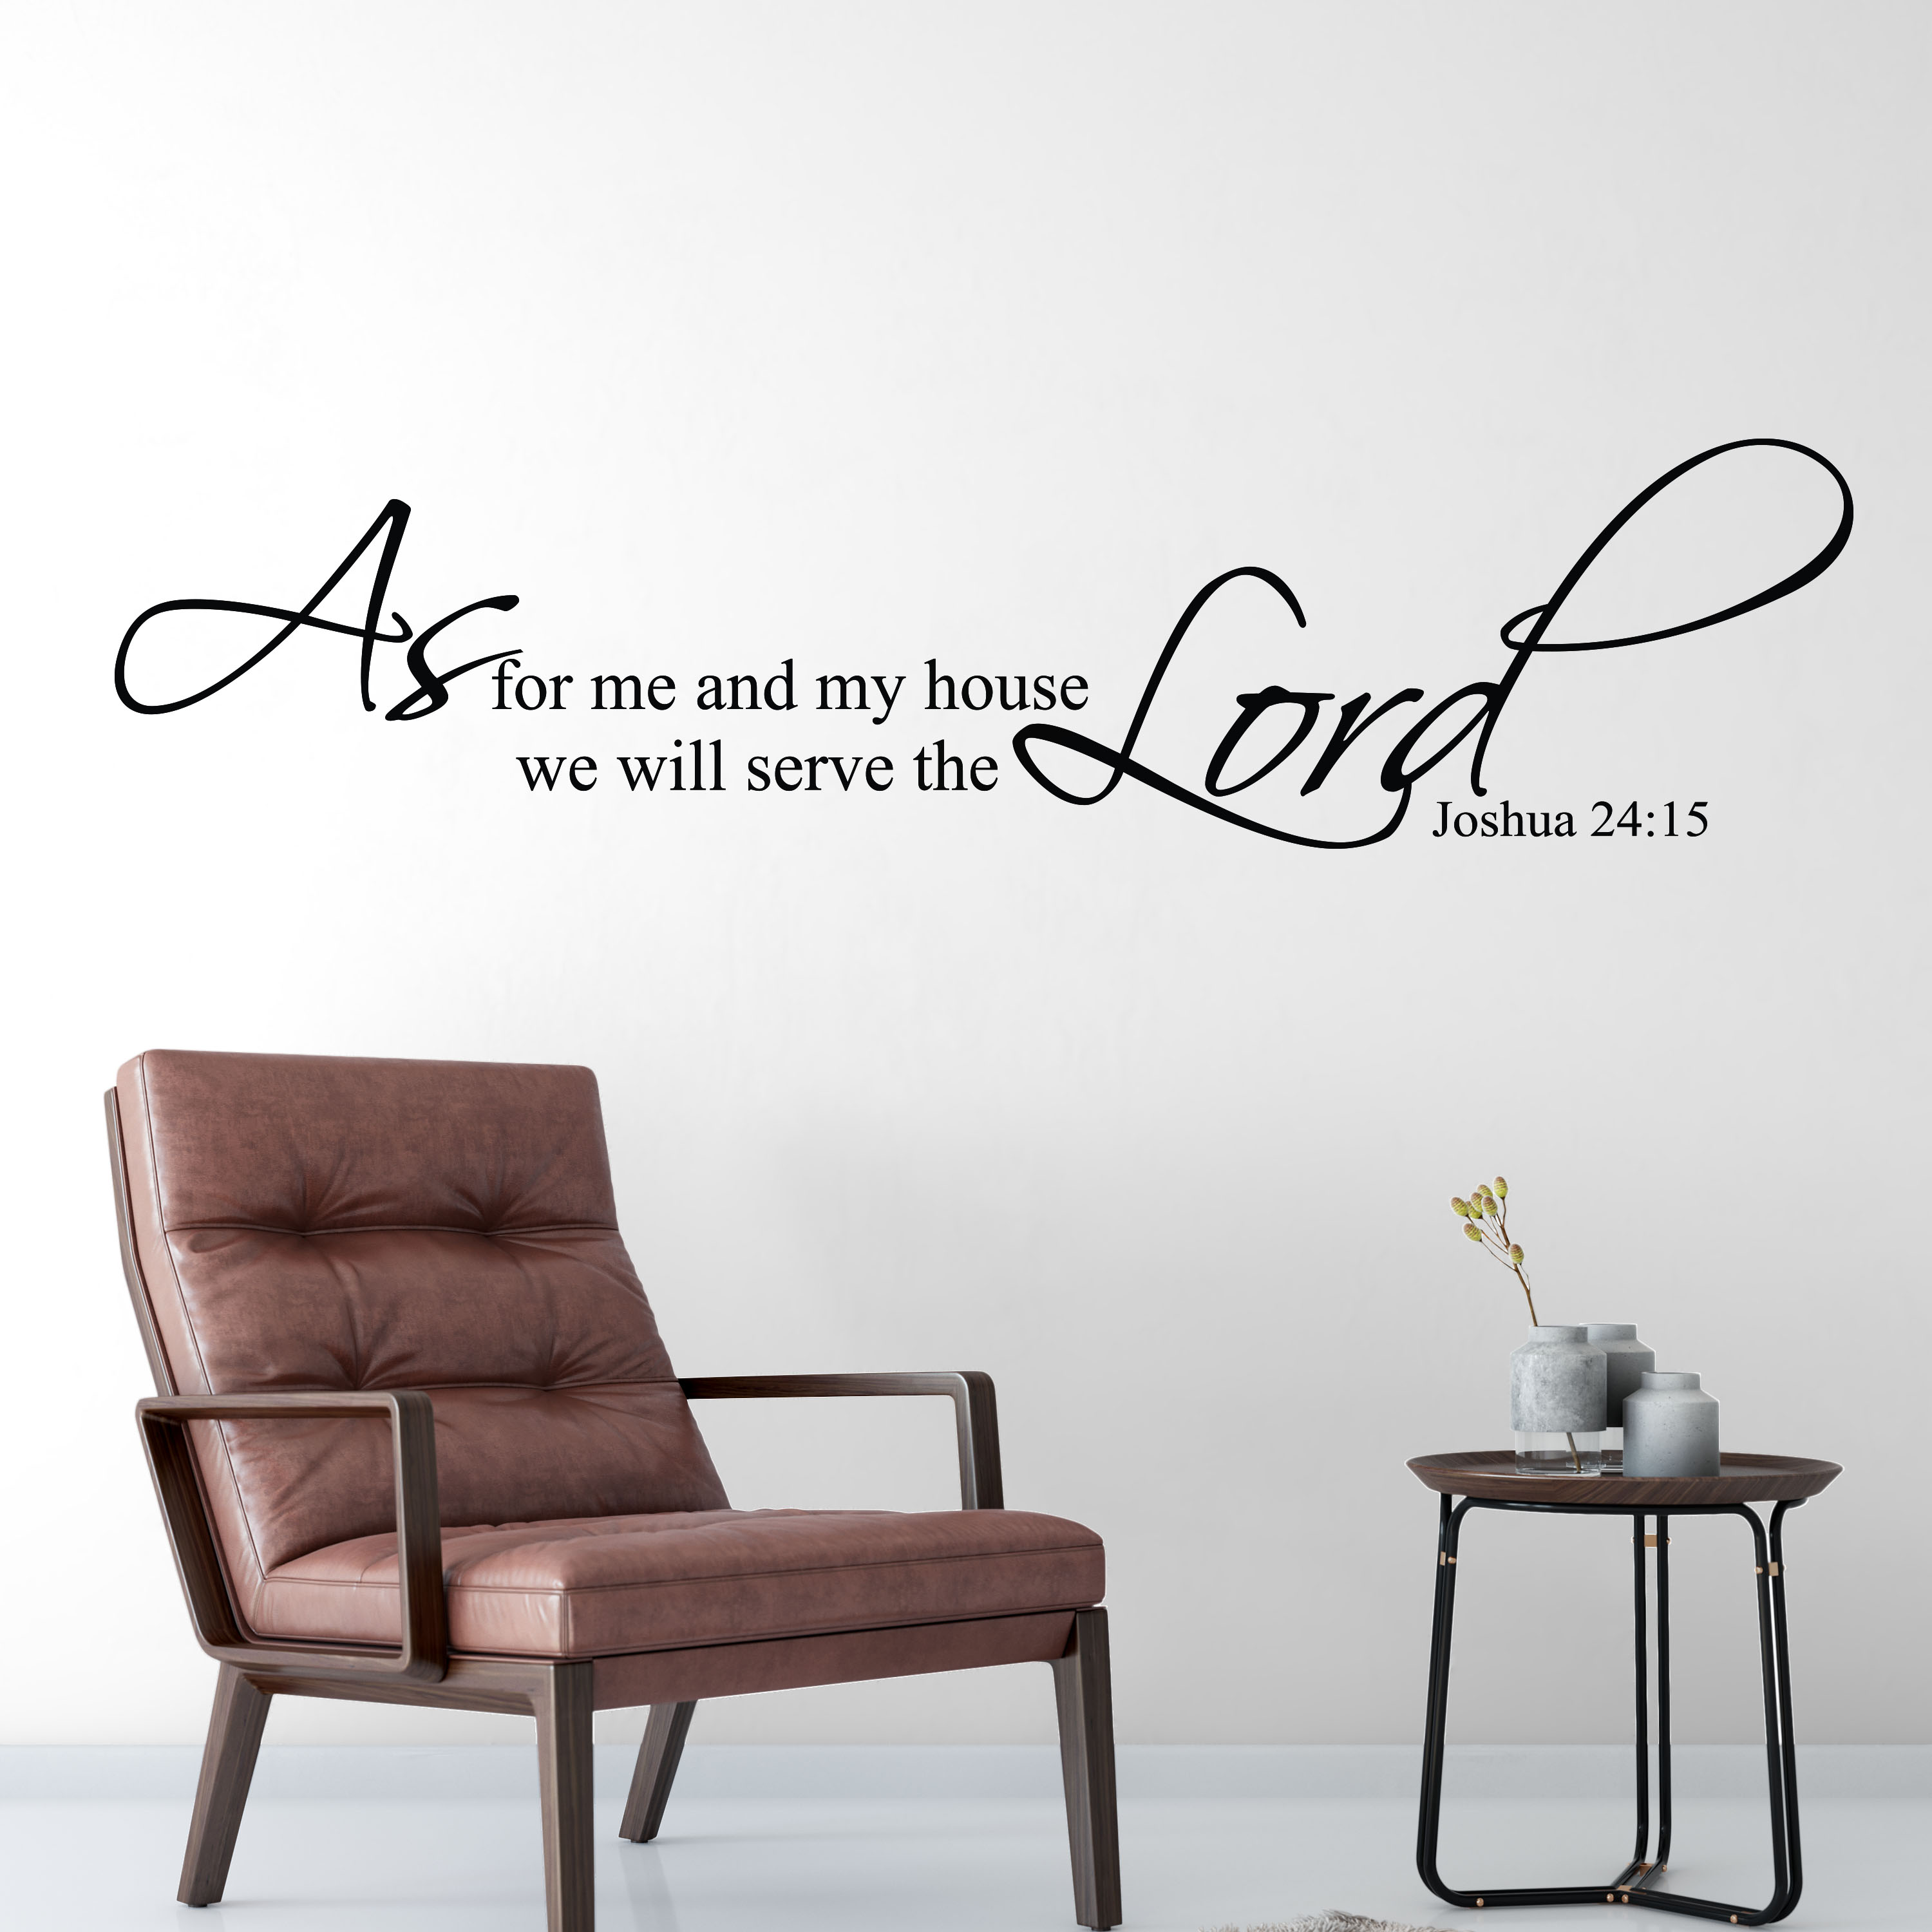 Joshua 24v15 Vinyl Wall Decal 12 As for me and my house we will